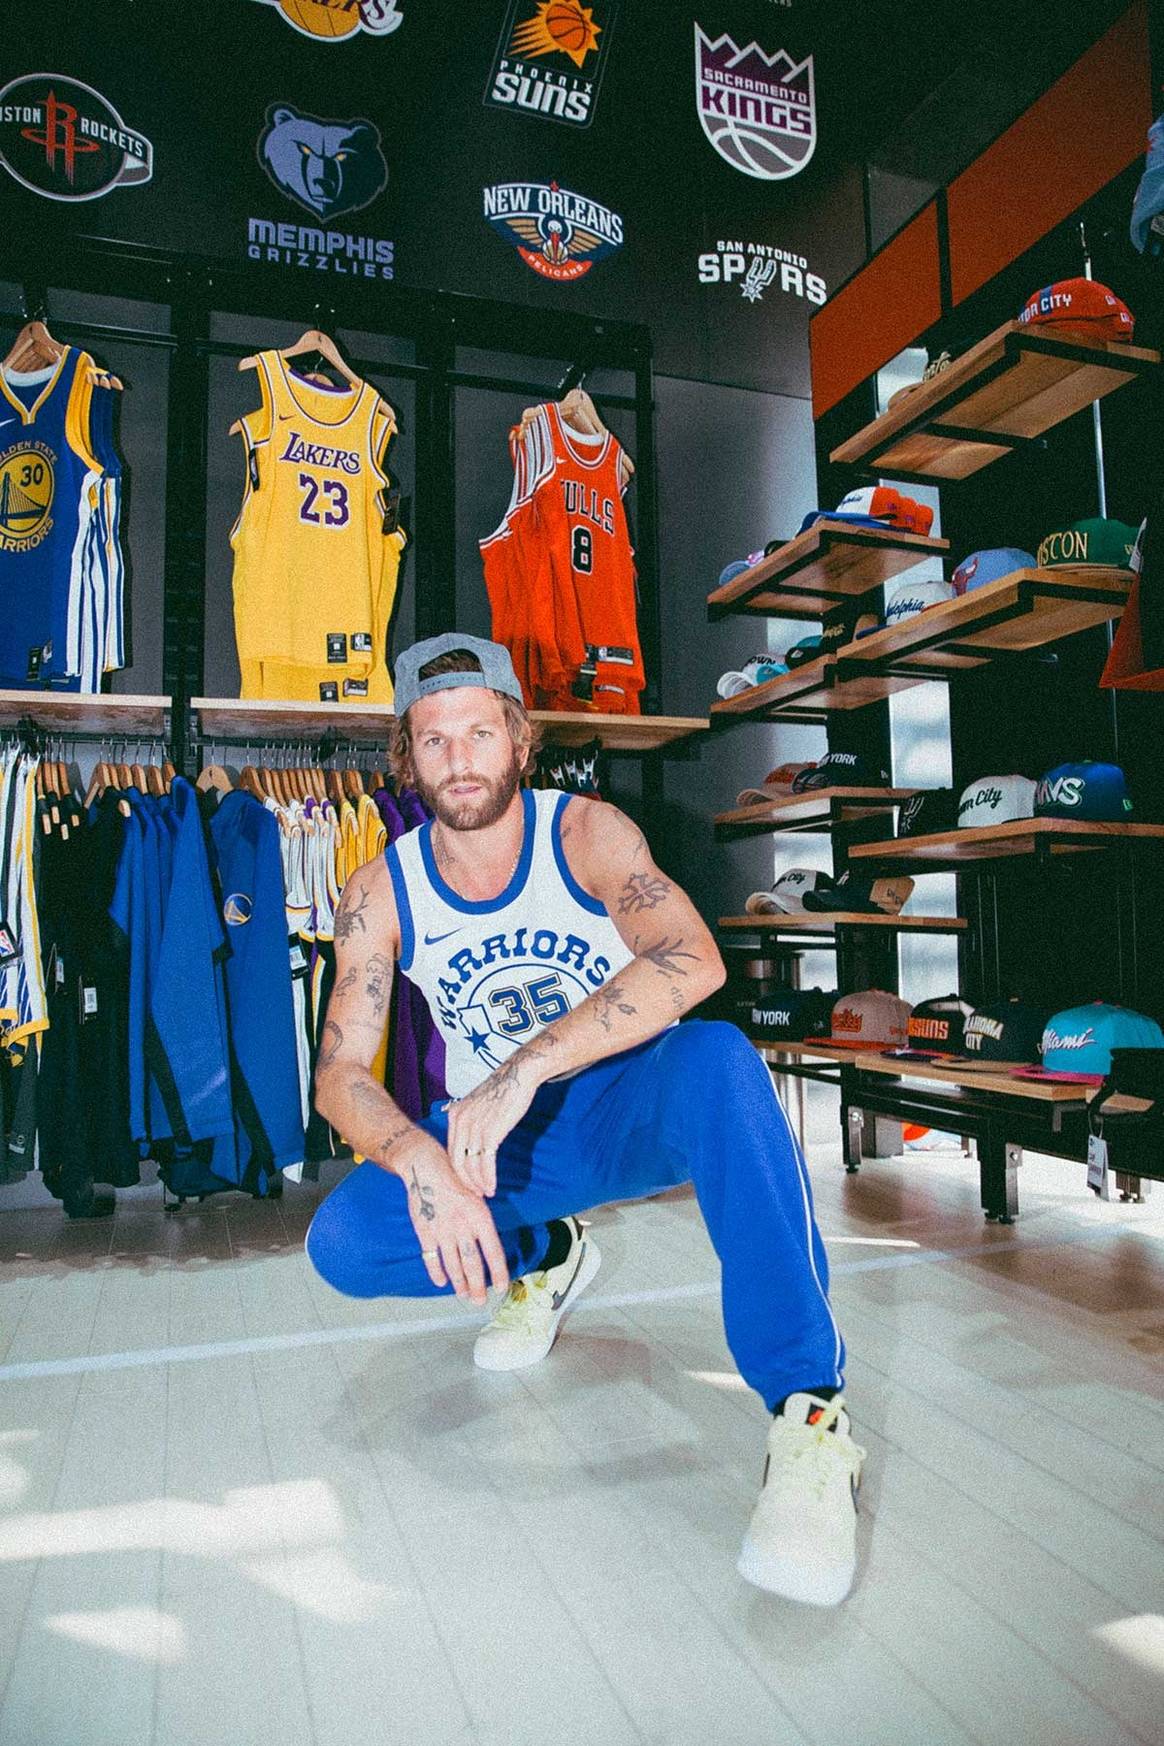 The first official NBA store opens in Mexico